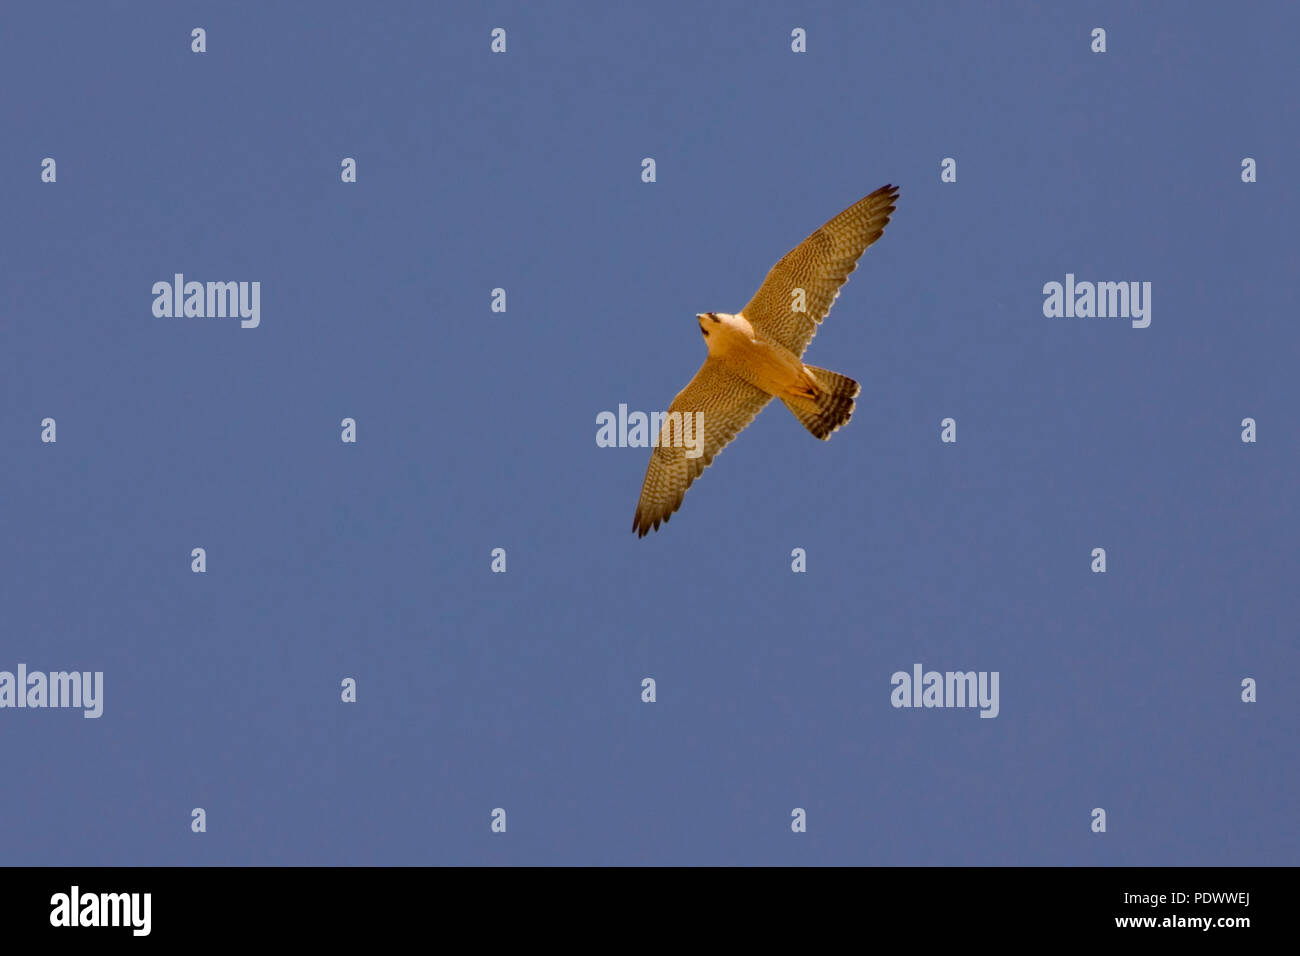 Barbary falcon in flight, underwing view in a blue sky. Stock Photo